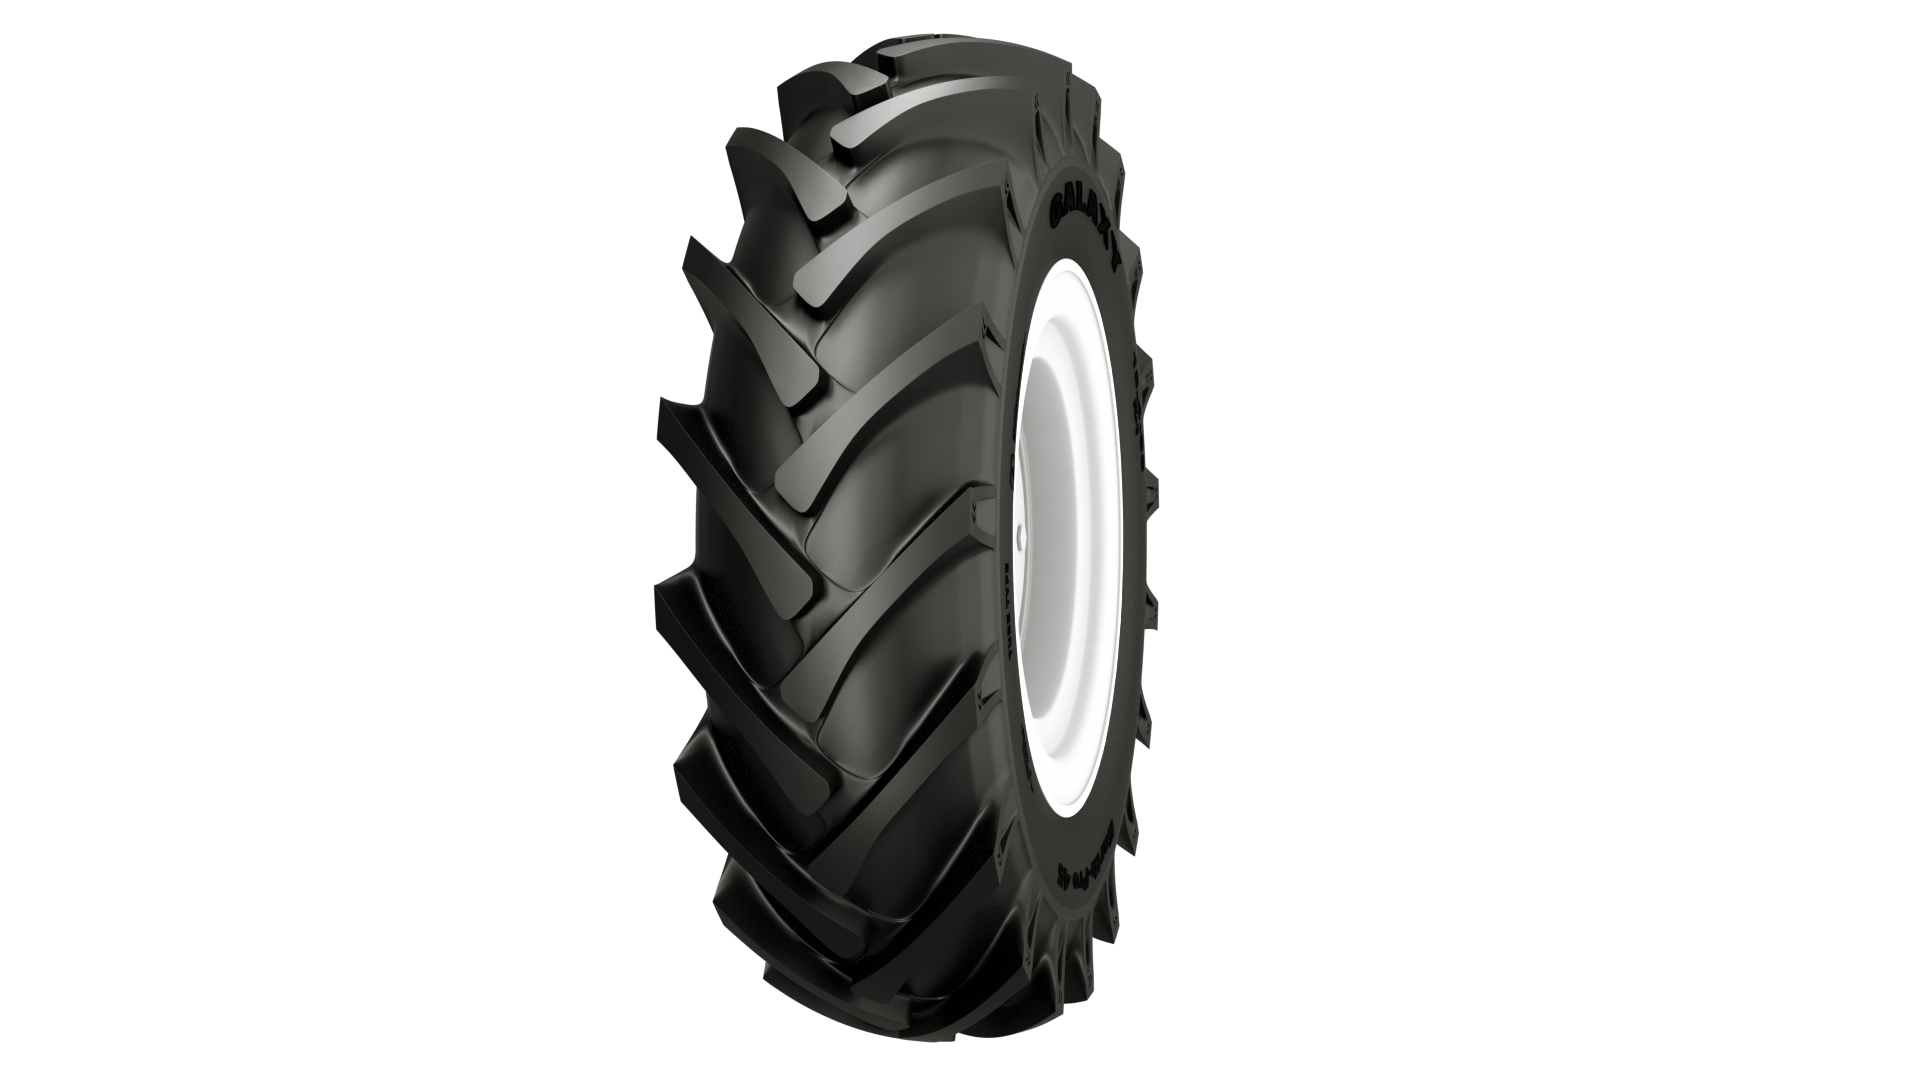 EarthPRO 45 GALAXY AGRICULTURE Tire